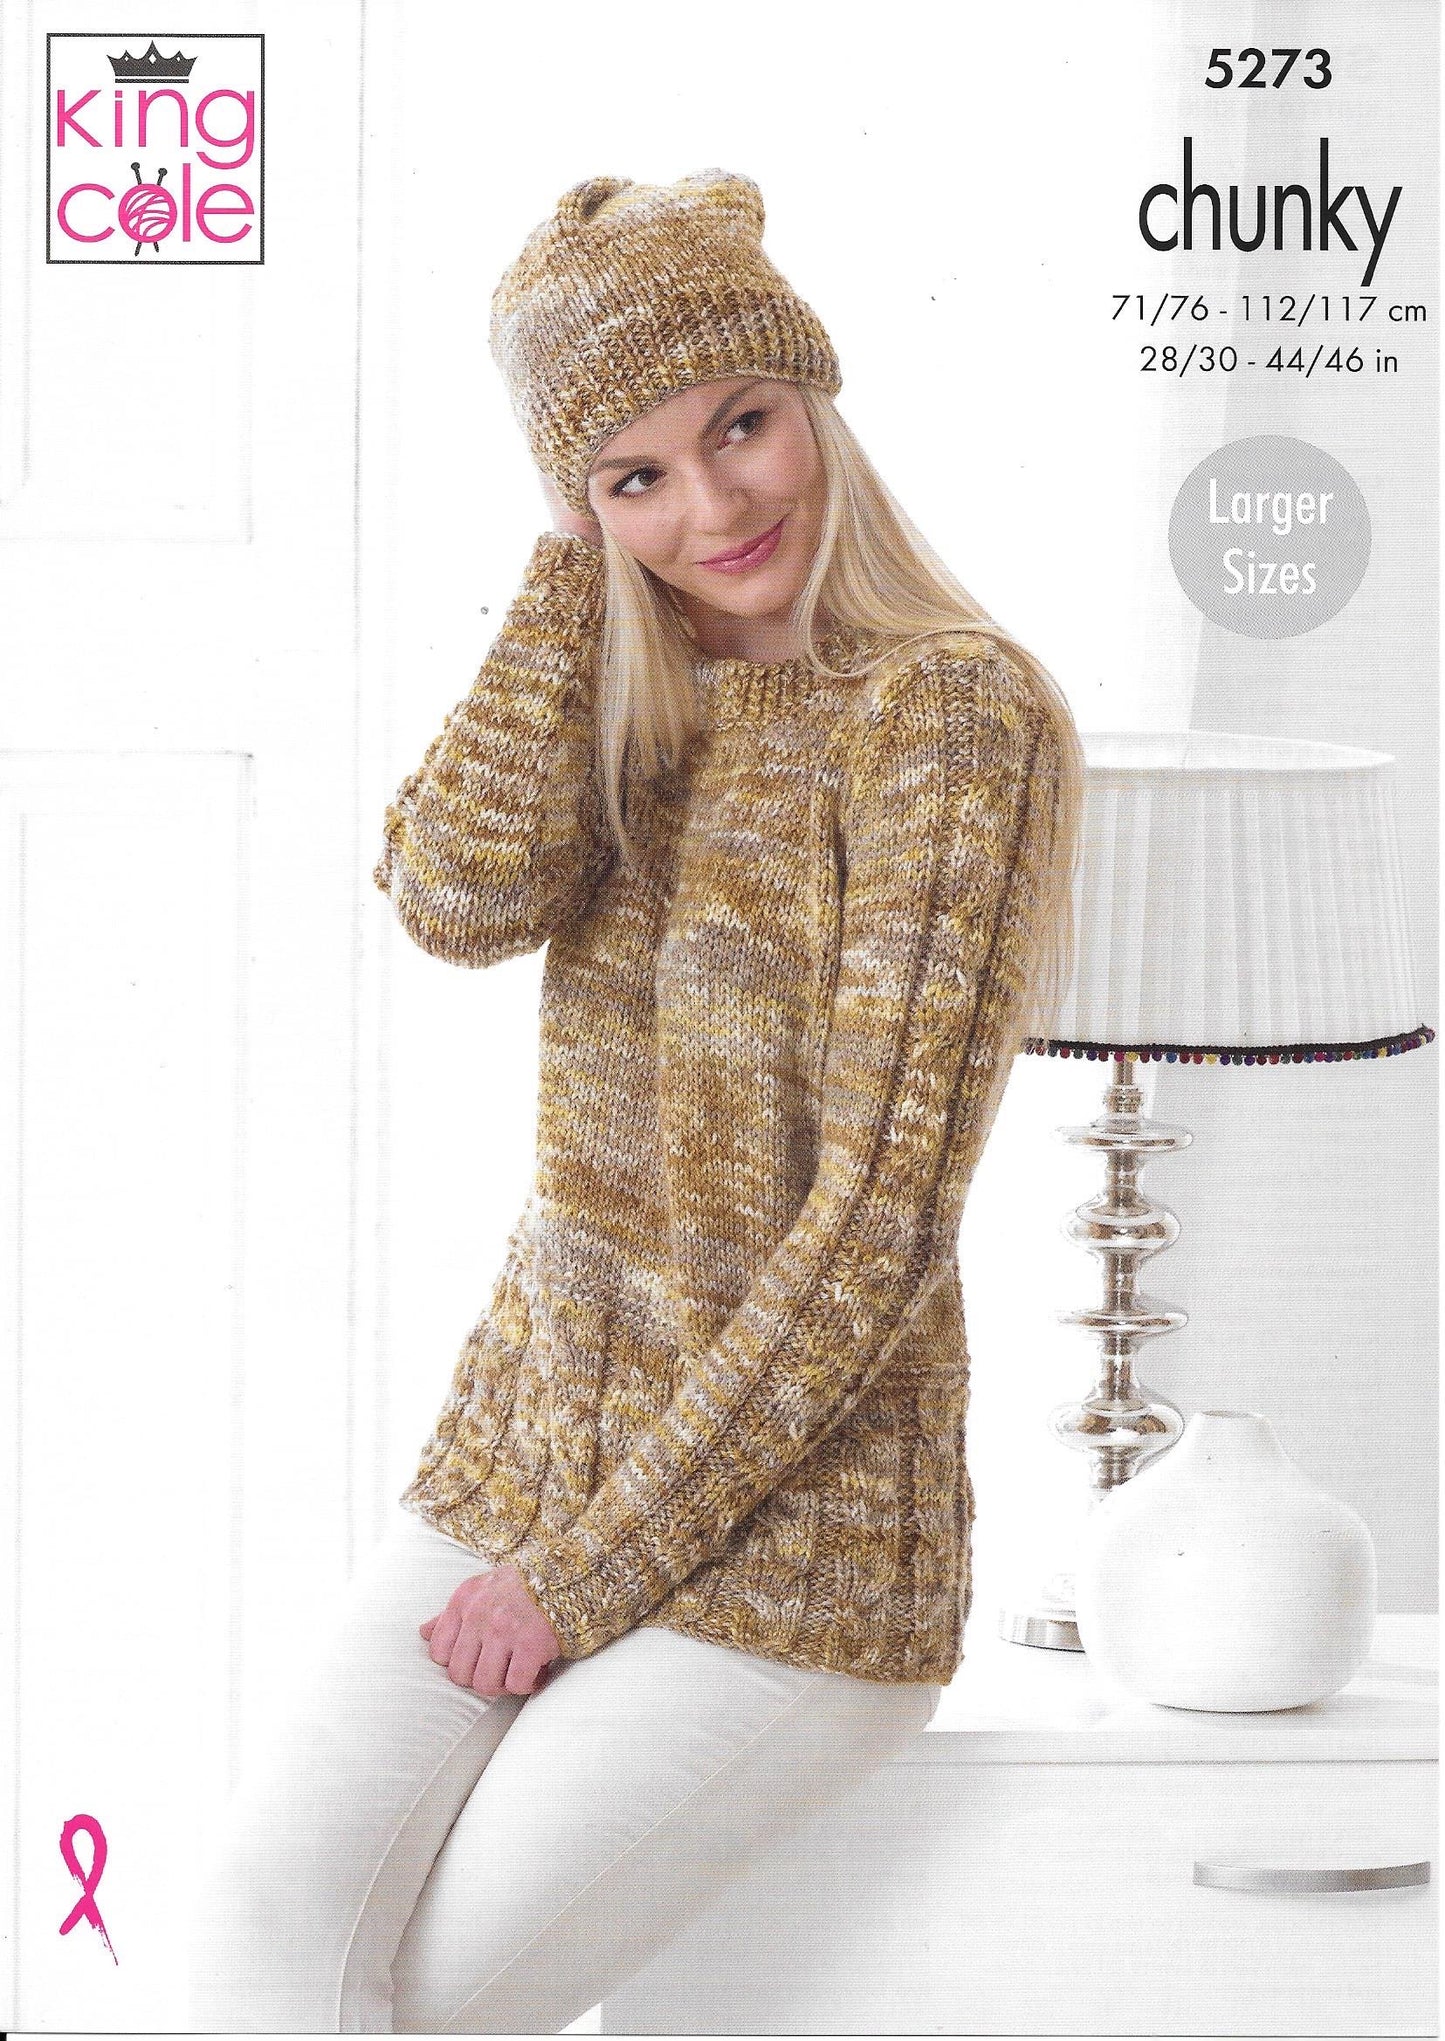 5273 King Cole Chunky Ladies Sweater, Cardigan and Hat Knitting Pattern